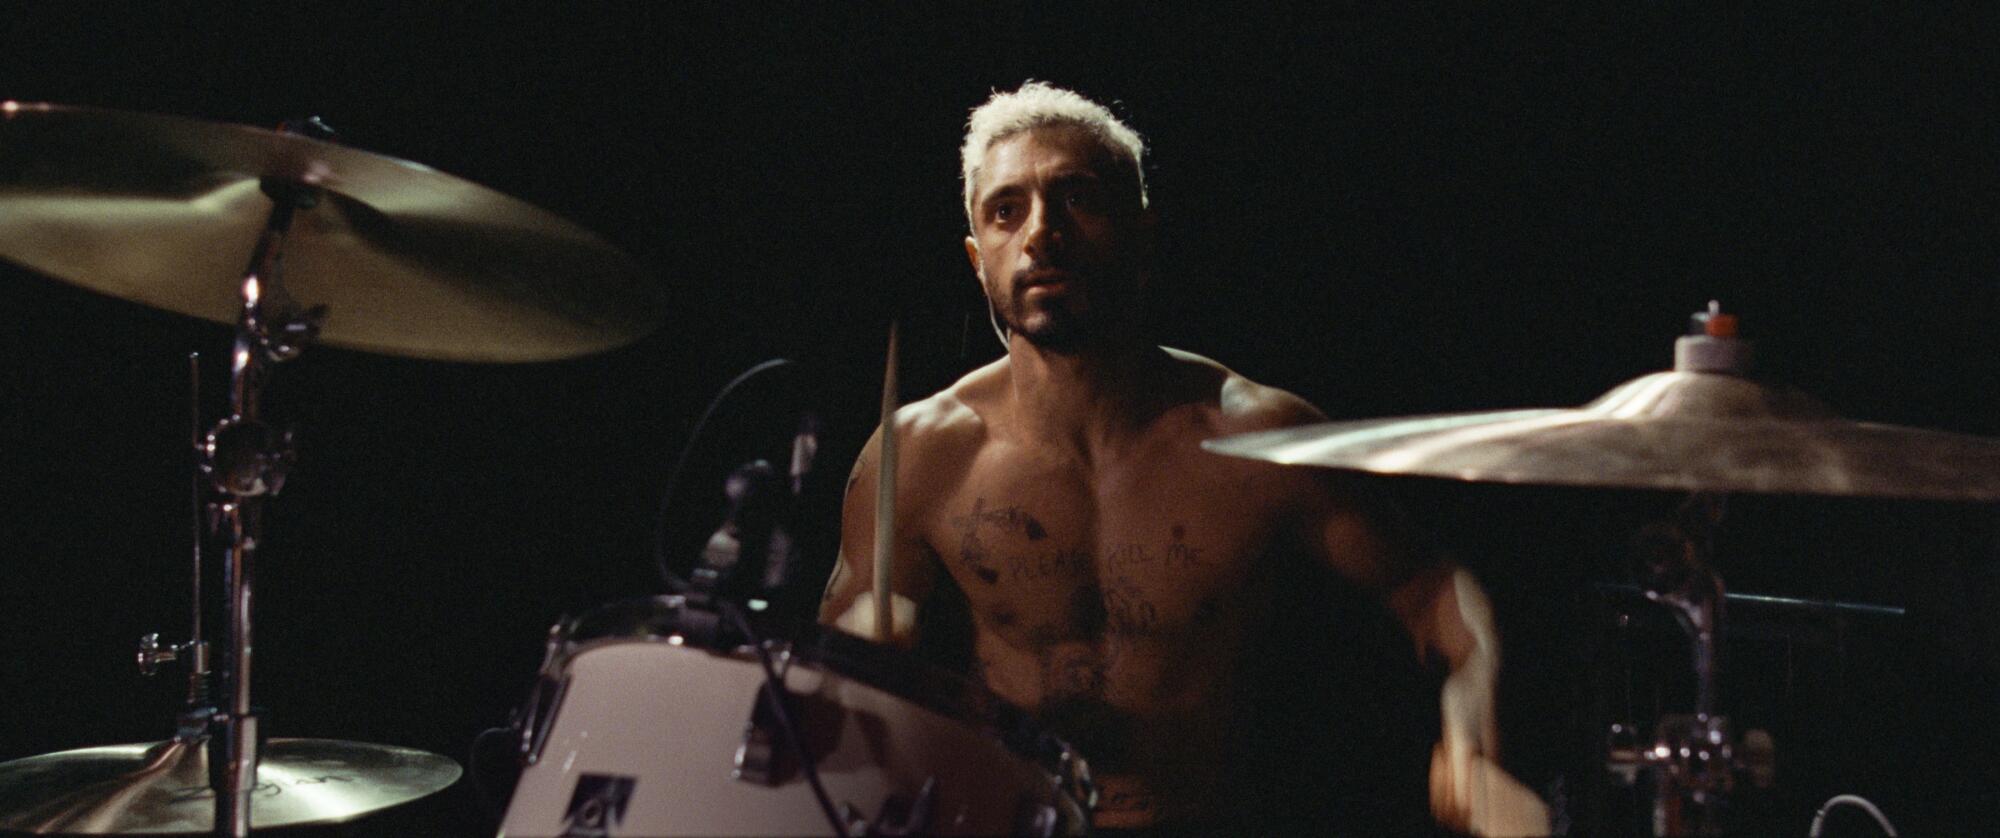 Riz Ahmed at the drums as Ruben, a musician losing his hearing, in "Sound of Metal."